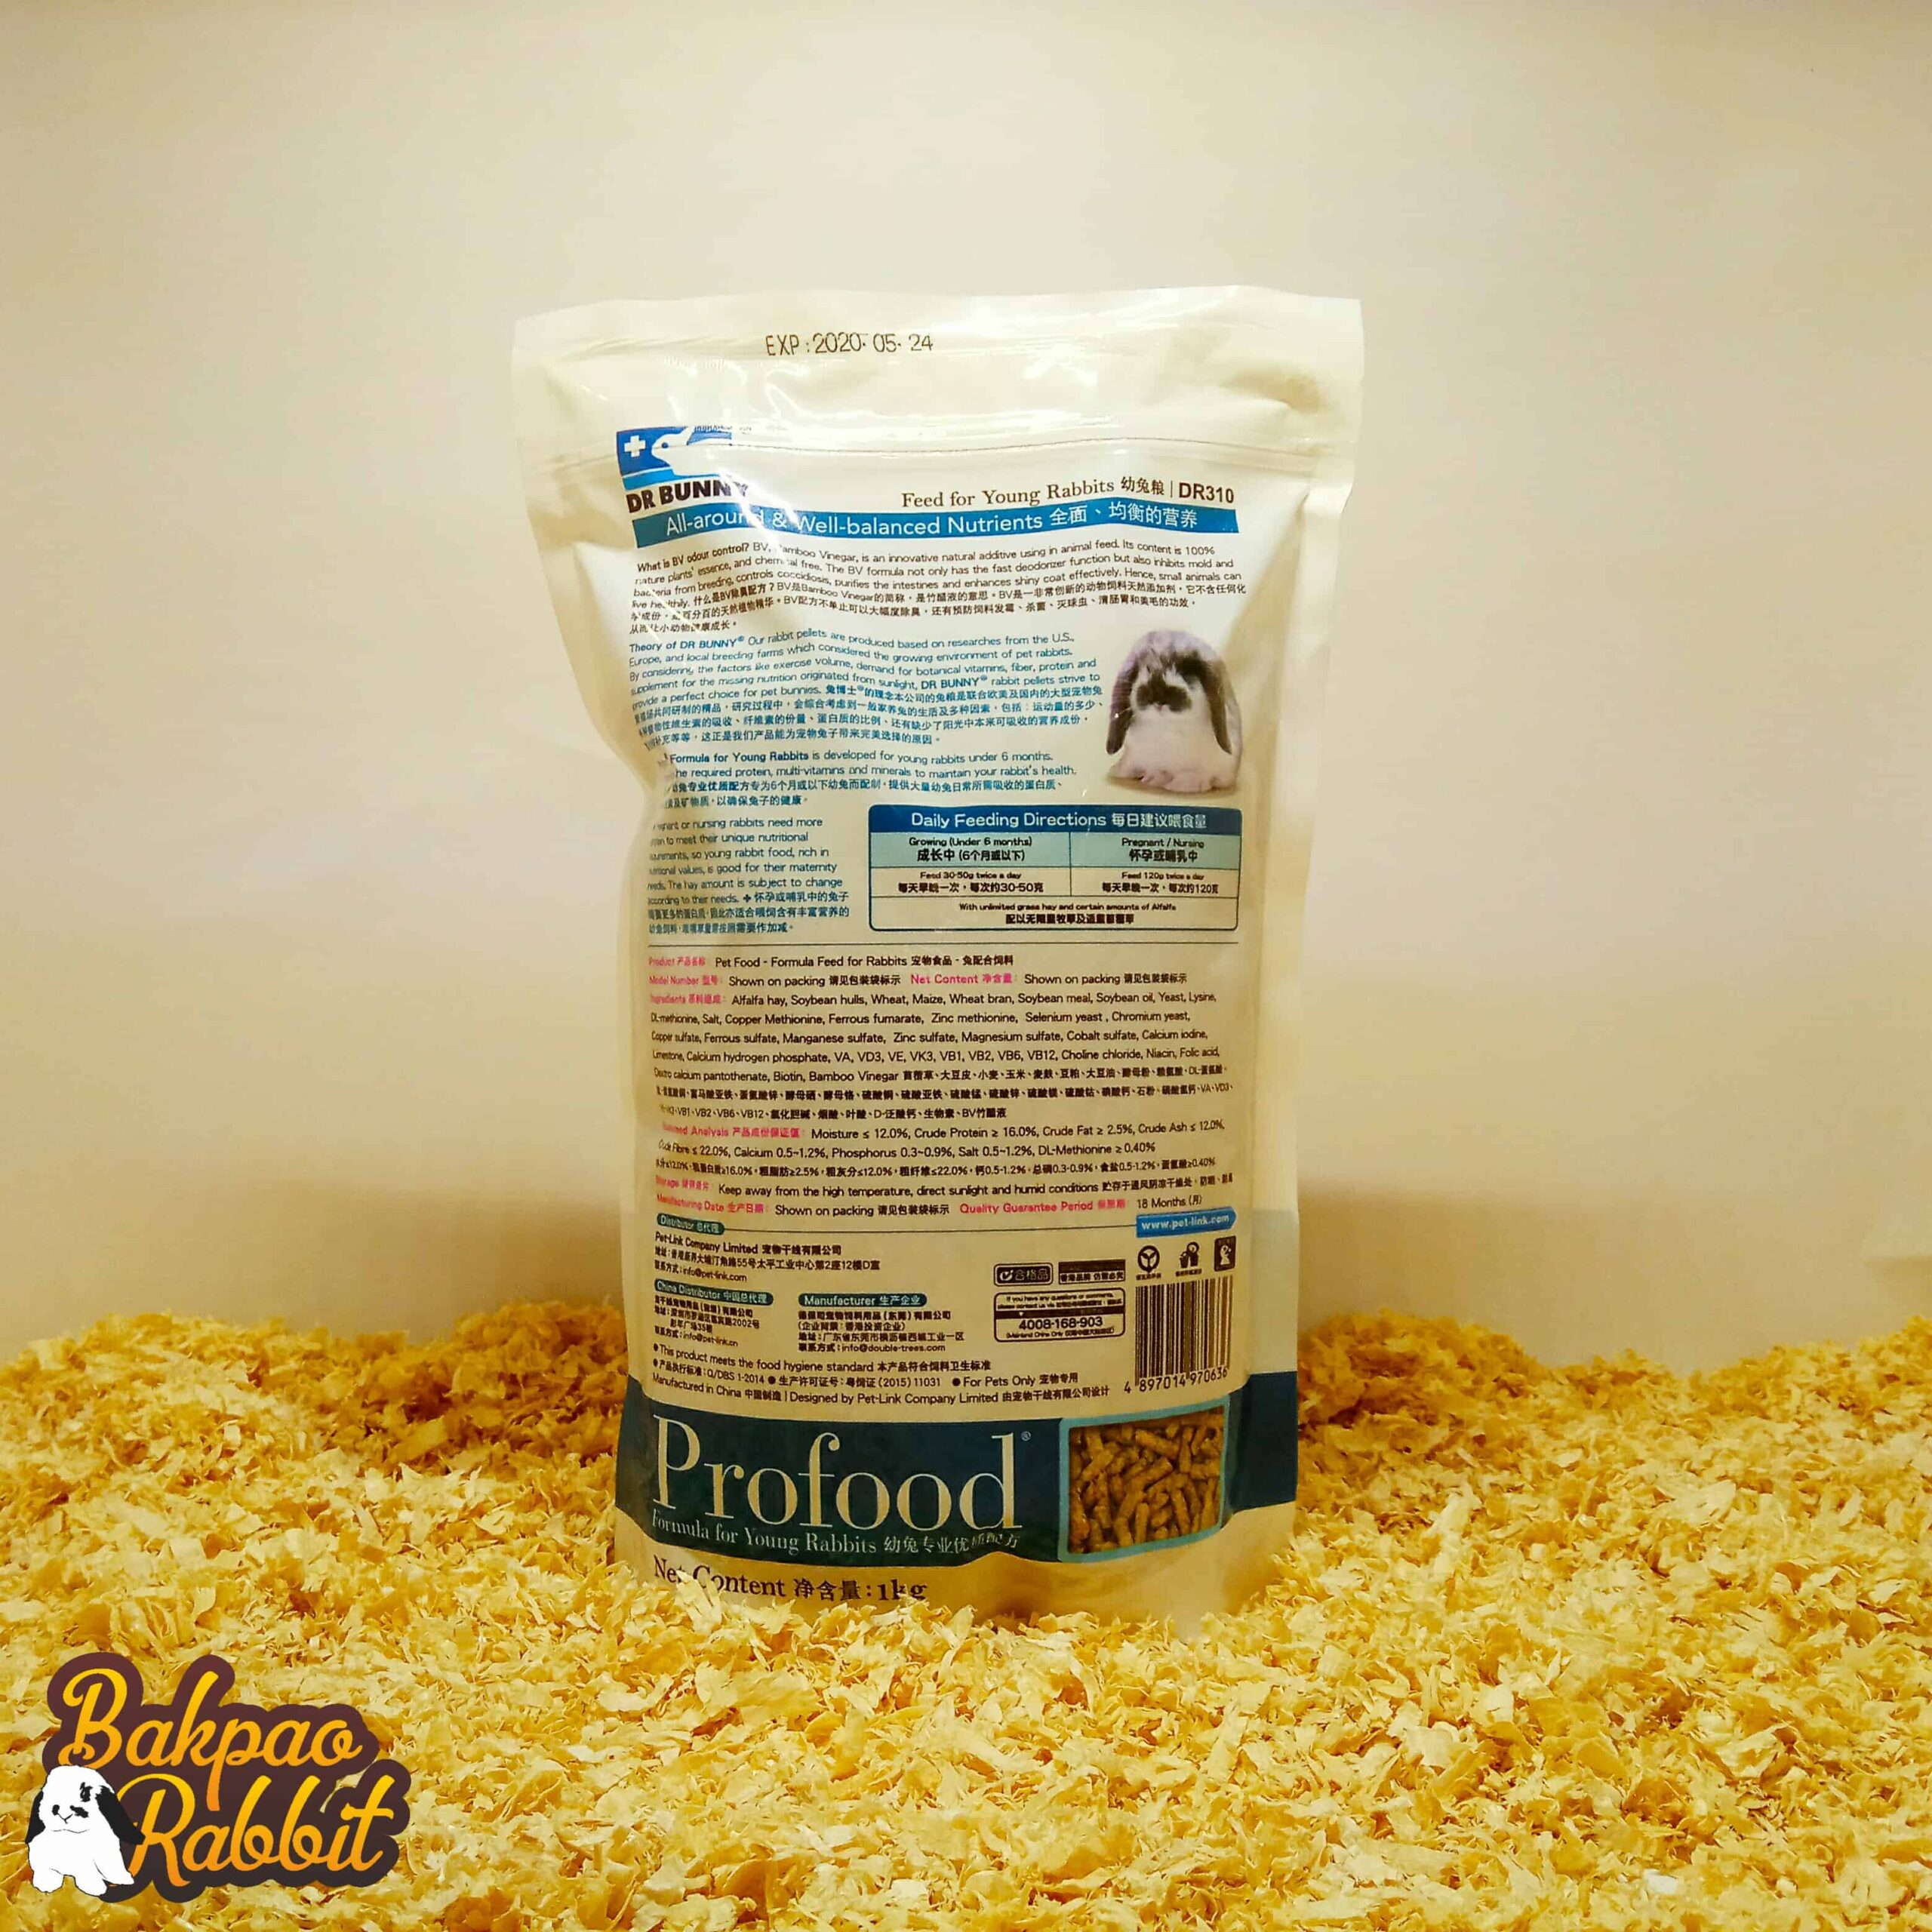 Dr Bunny DR310 Profood Formula For Young Rabbits 1kg